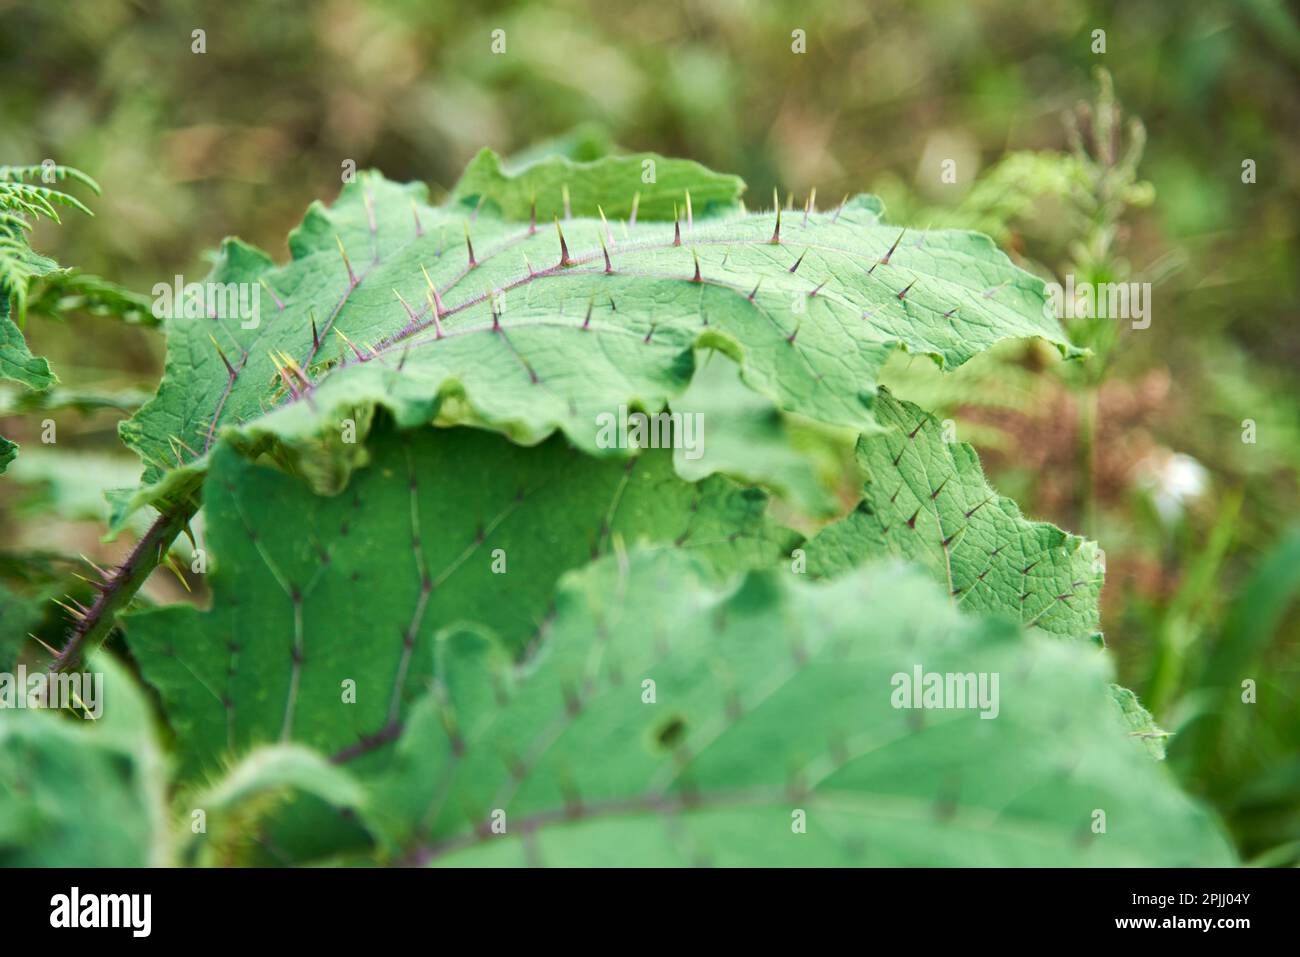 Spiny green leaves of solanum stramoniifolium, a solanaceae plant of South America that has thorns on the surface of its leaves as a defense. Stock Photo